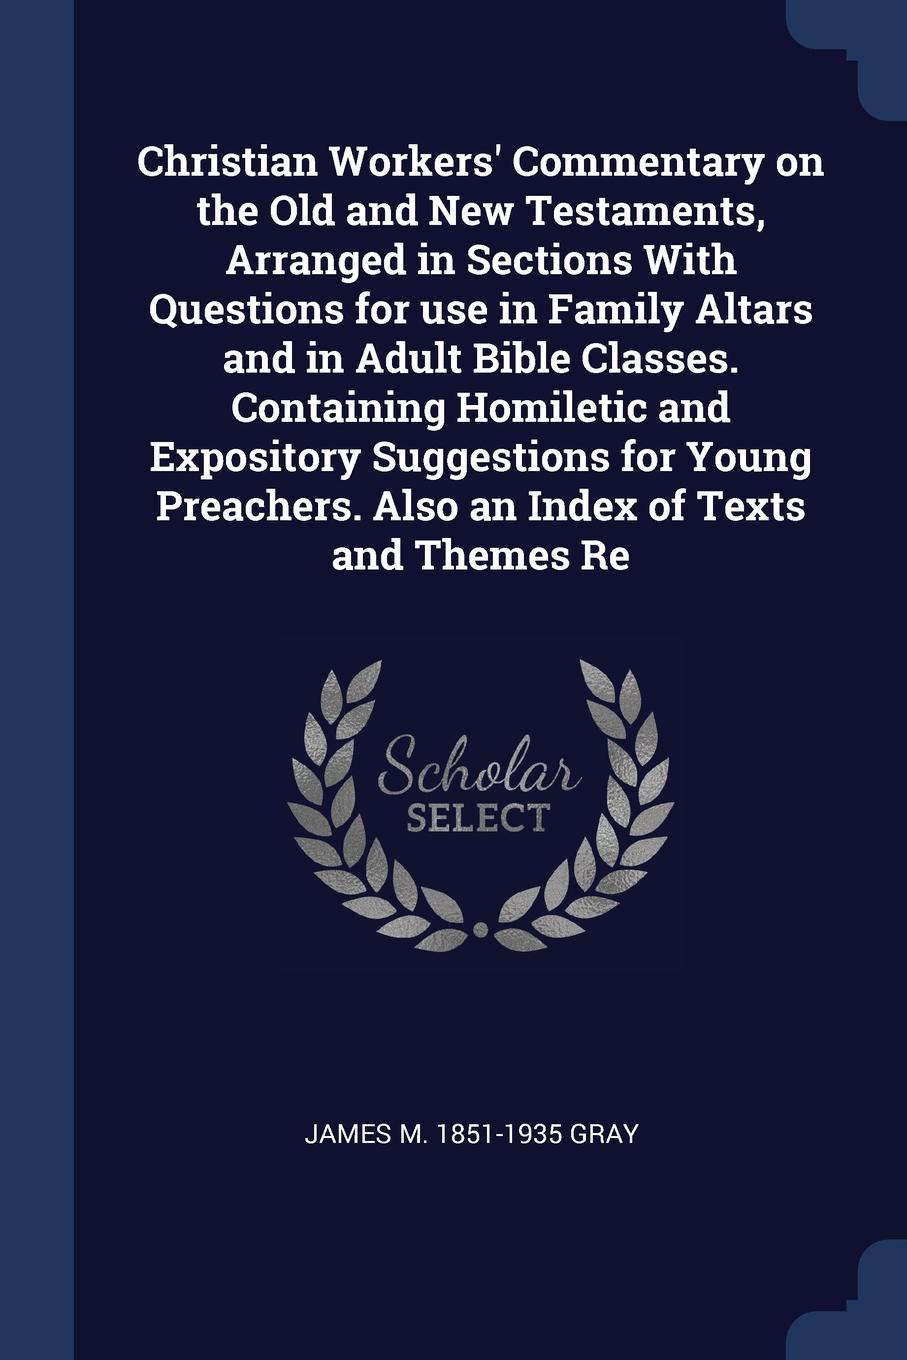 Christian Workers` Commentary on the Old and New Testaments, Arranged in Sections With Questions for use in Family Altars and in Adult Bible Classes. Containing Homiletic and Expository Suggestions for Young Preachers. Also an Index of Texts and T...